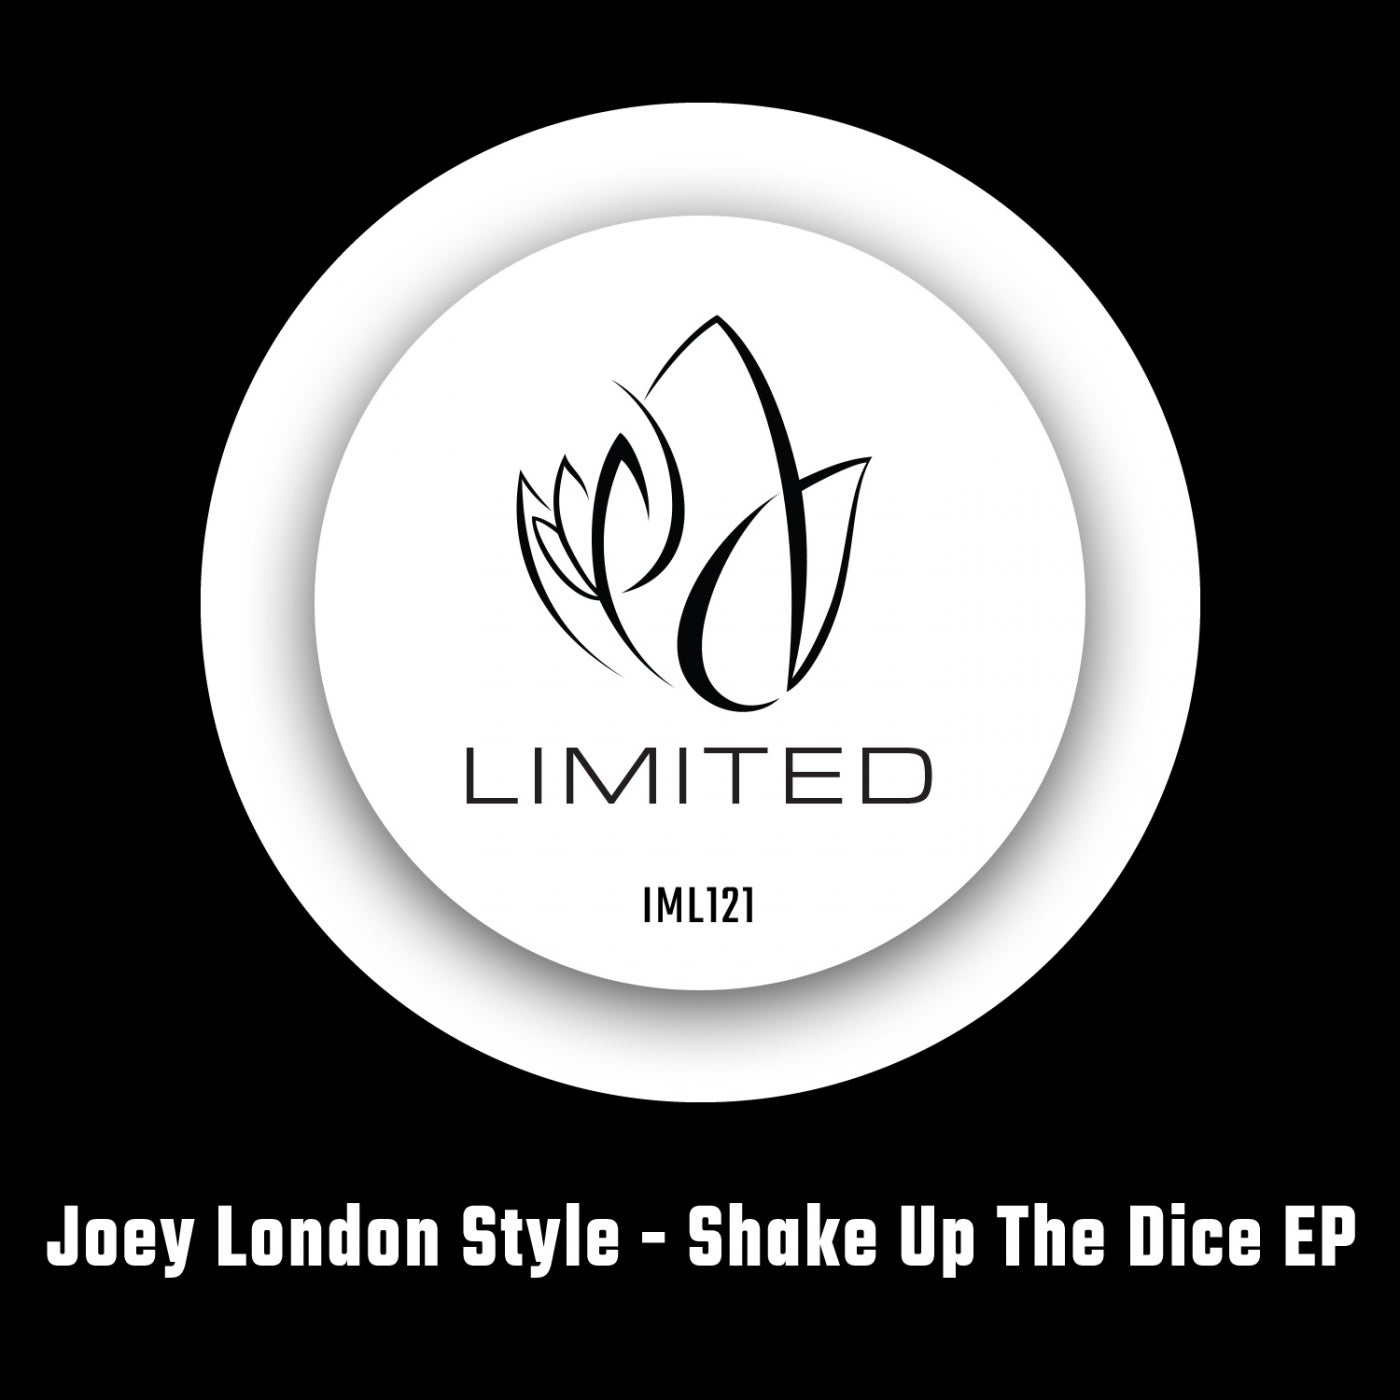 Shake Up The Dice EP